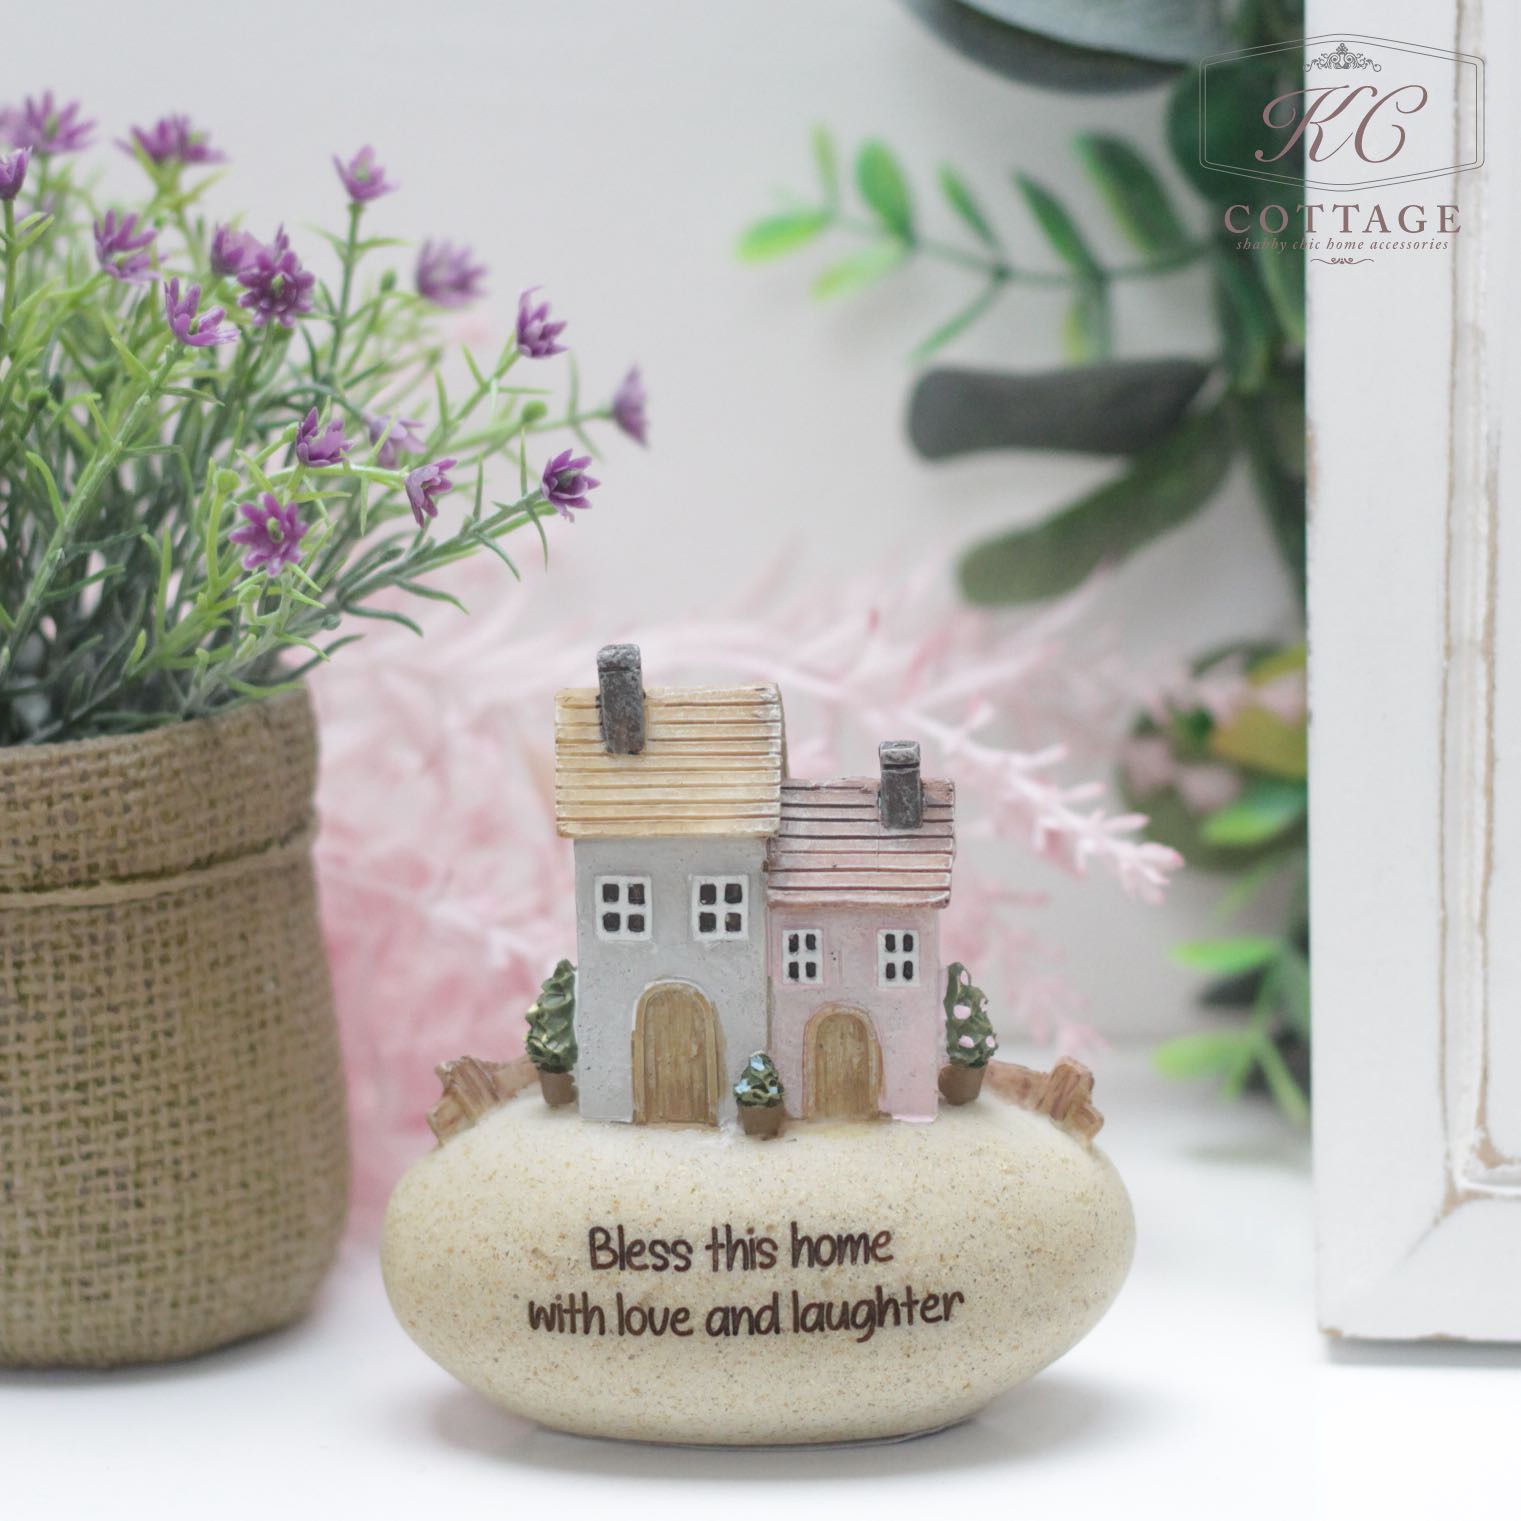 Pebble Lane Cottage - Bless this home with love and laughter